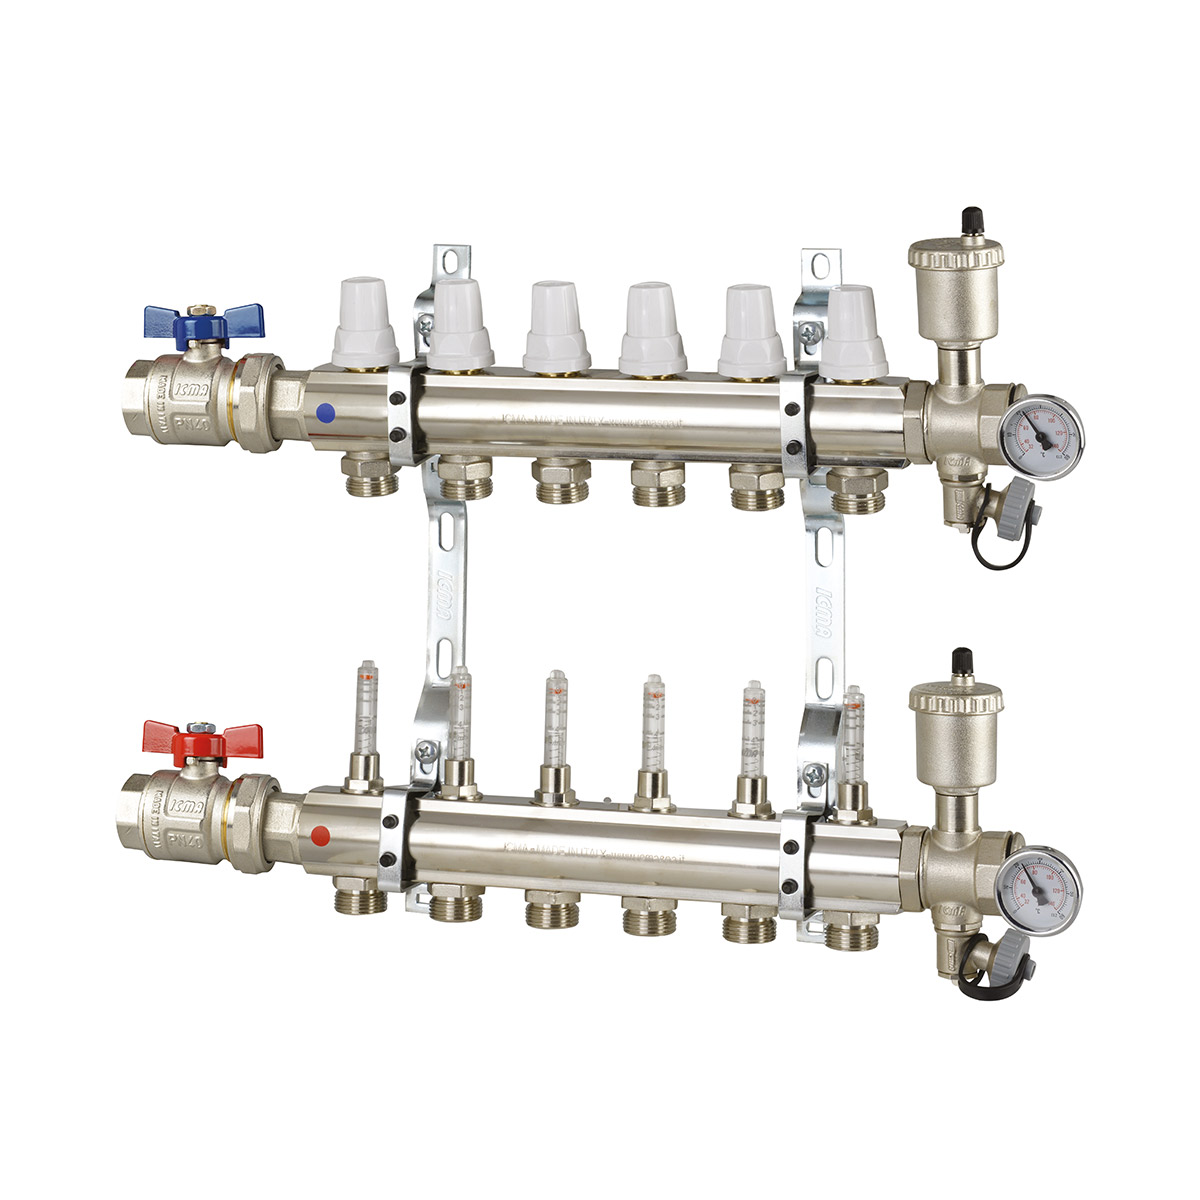 Manifolds unit with memory flowmeters and valves with thermostatic option